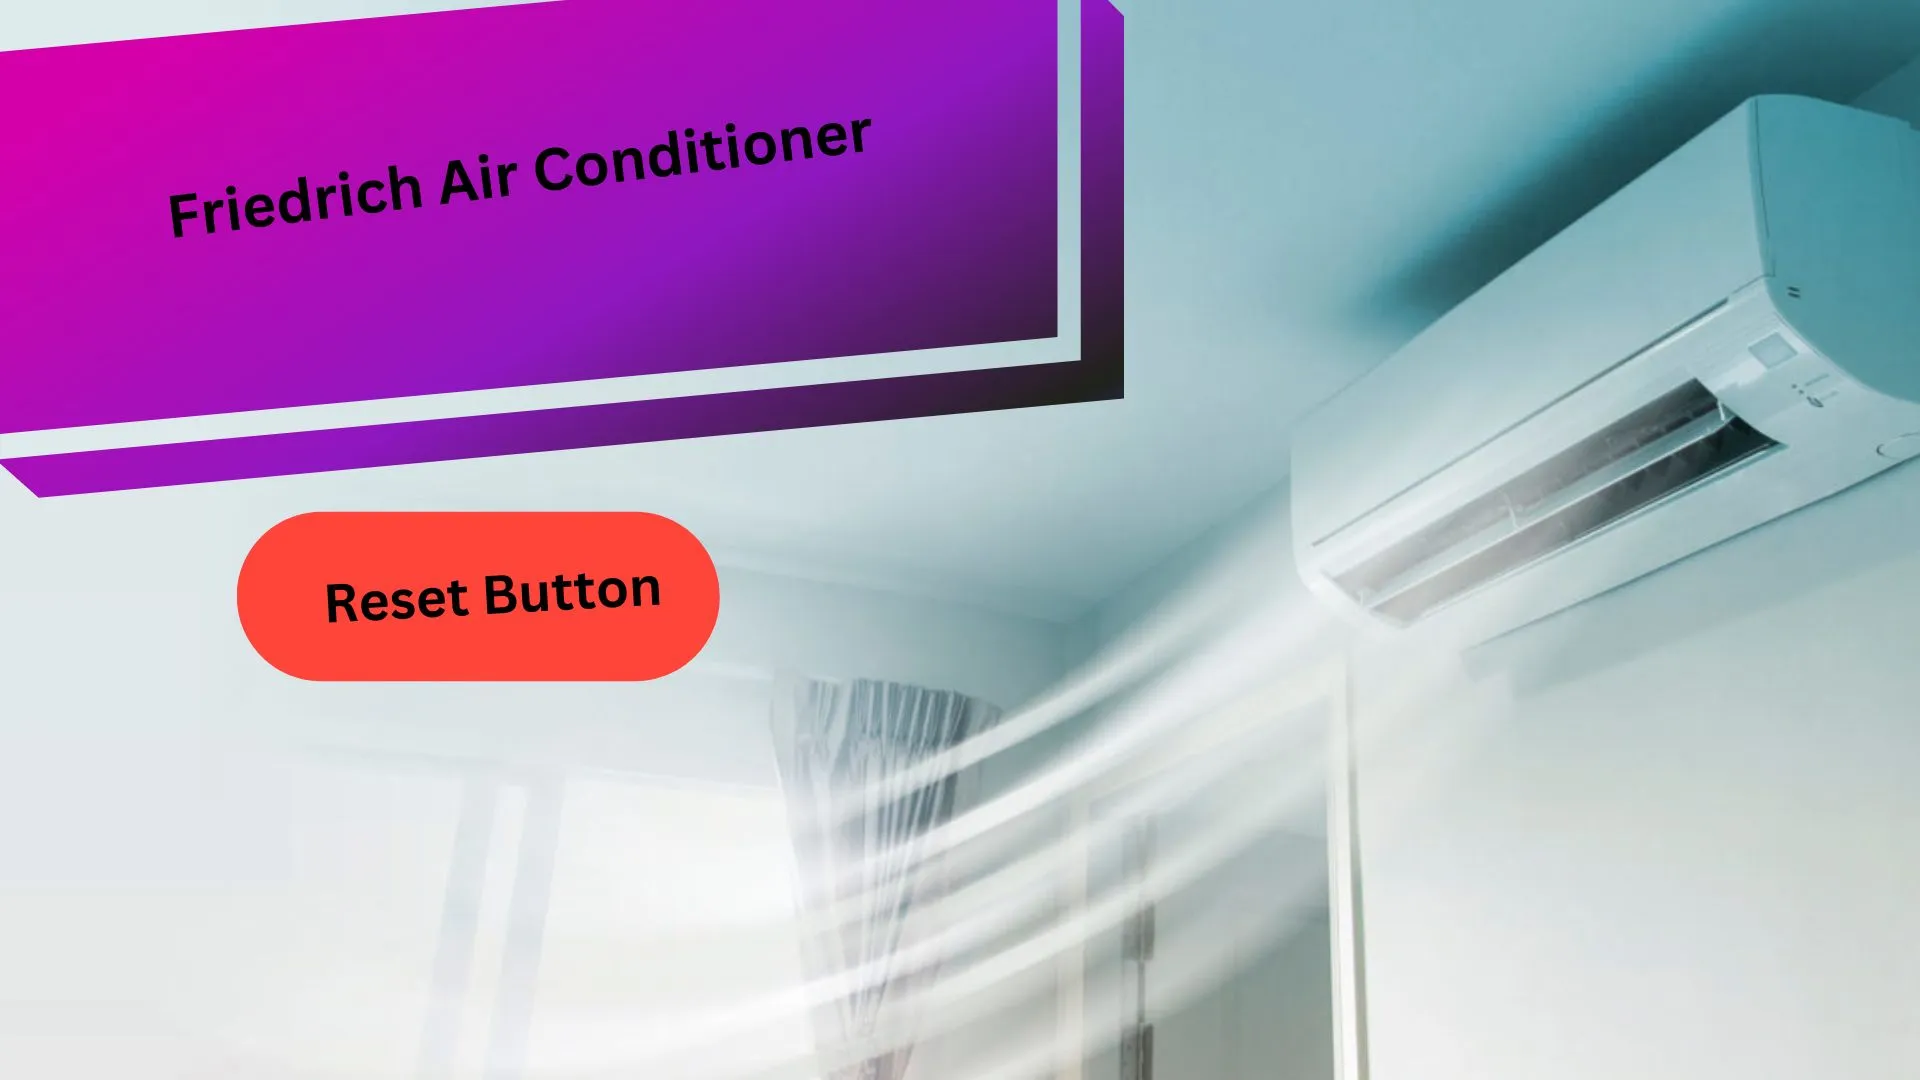 Friedrich Air Conditioner Reset Button [How to Reset it]